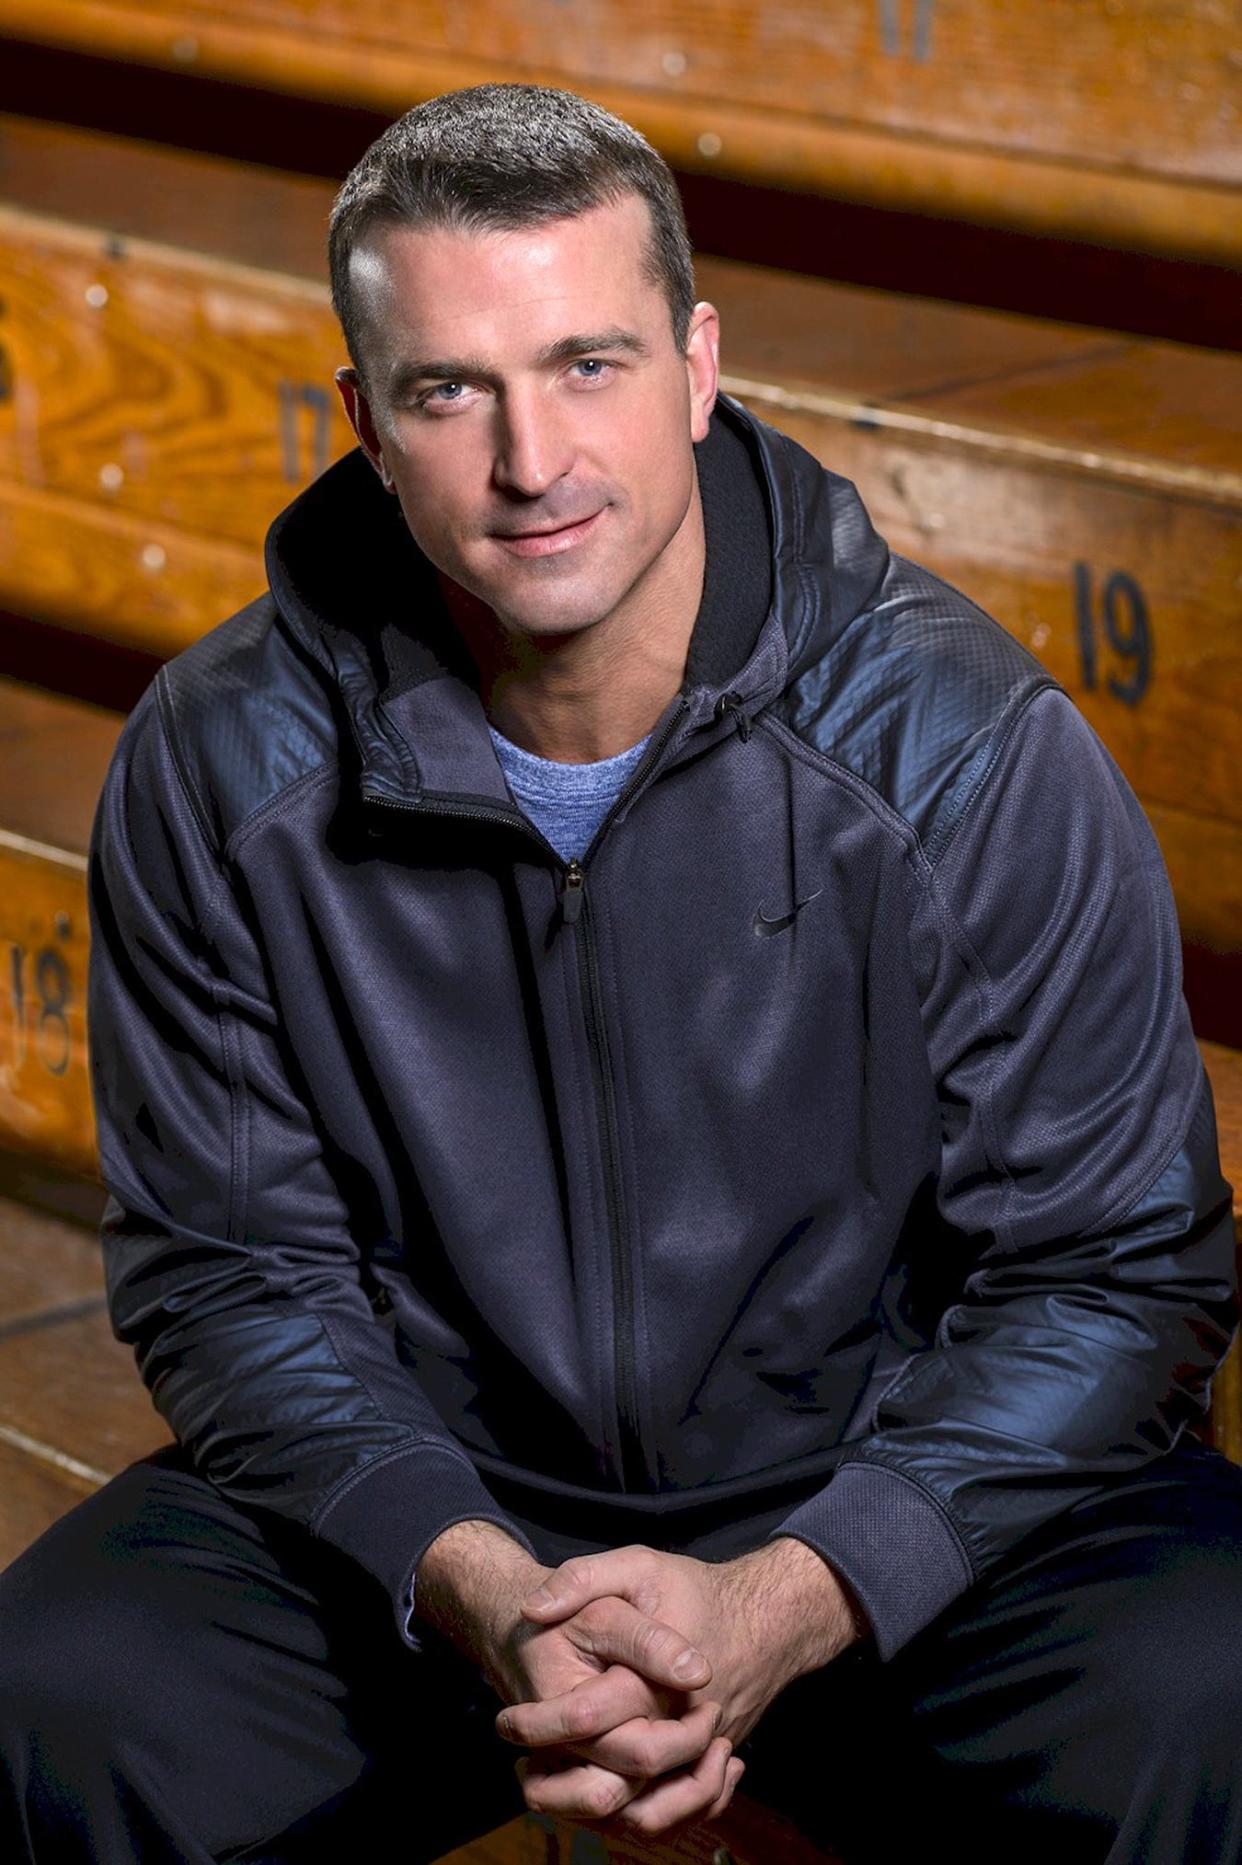 Tobacco Free Amarillo and Amarillo College Criminal Justice Programs will host a compelling and inspirational event featuring former NBA player, Chris Herren, from 10 a.m. to 12:30 p.m. on Thursday, Nov. 9, at Amarillo College West Campus, Lecture Hall, 6222 W. 9th Ave.